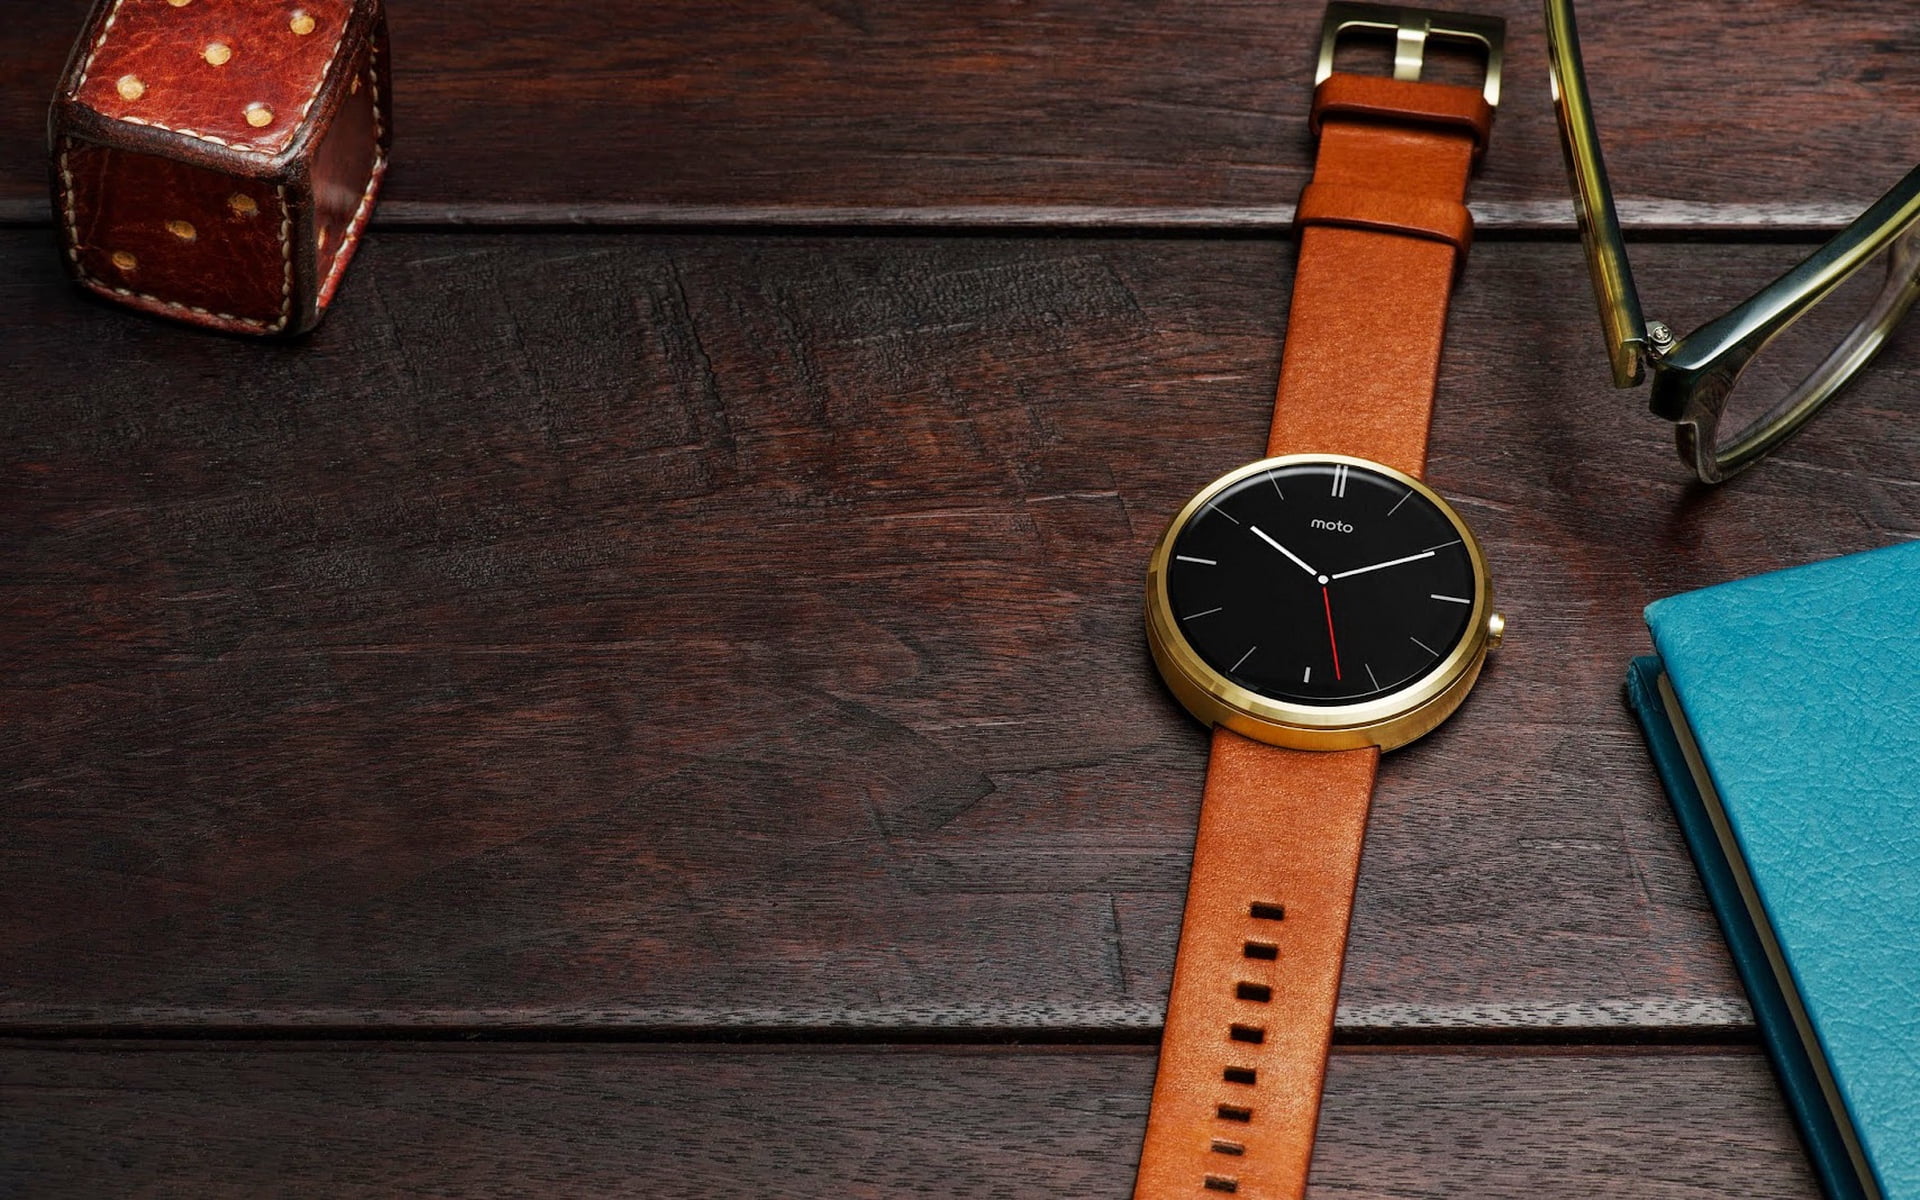 gold-colored analog watch with brown leather strap, motorola